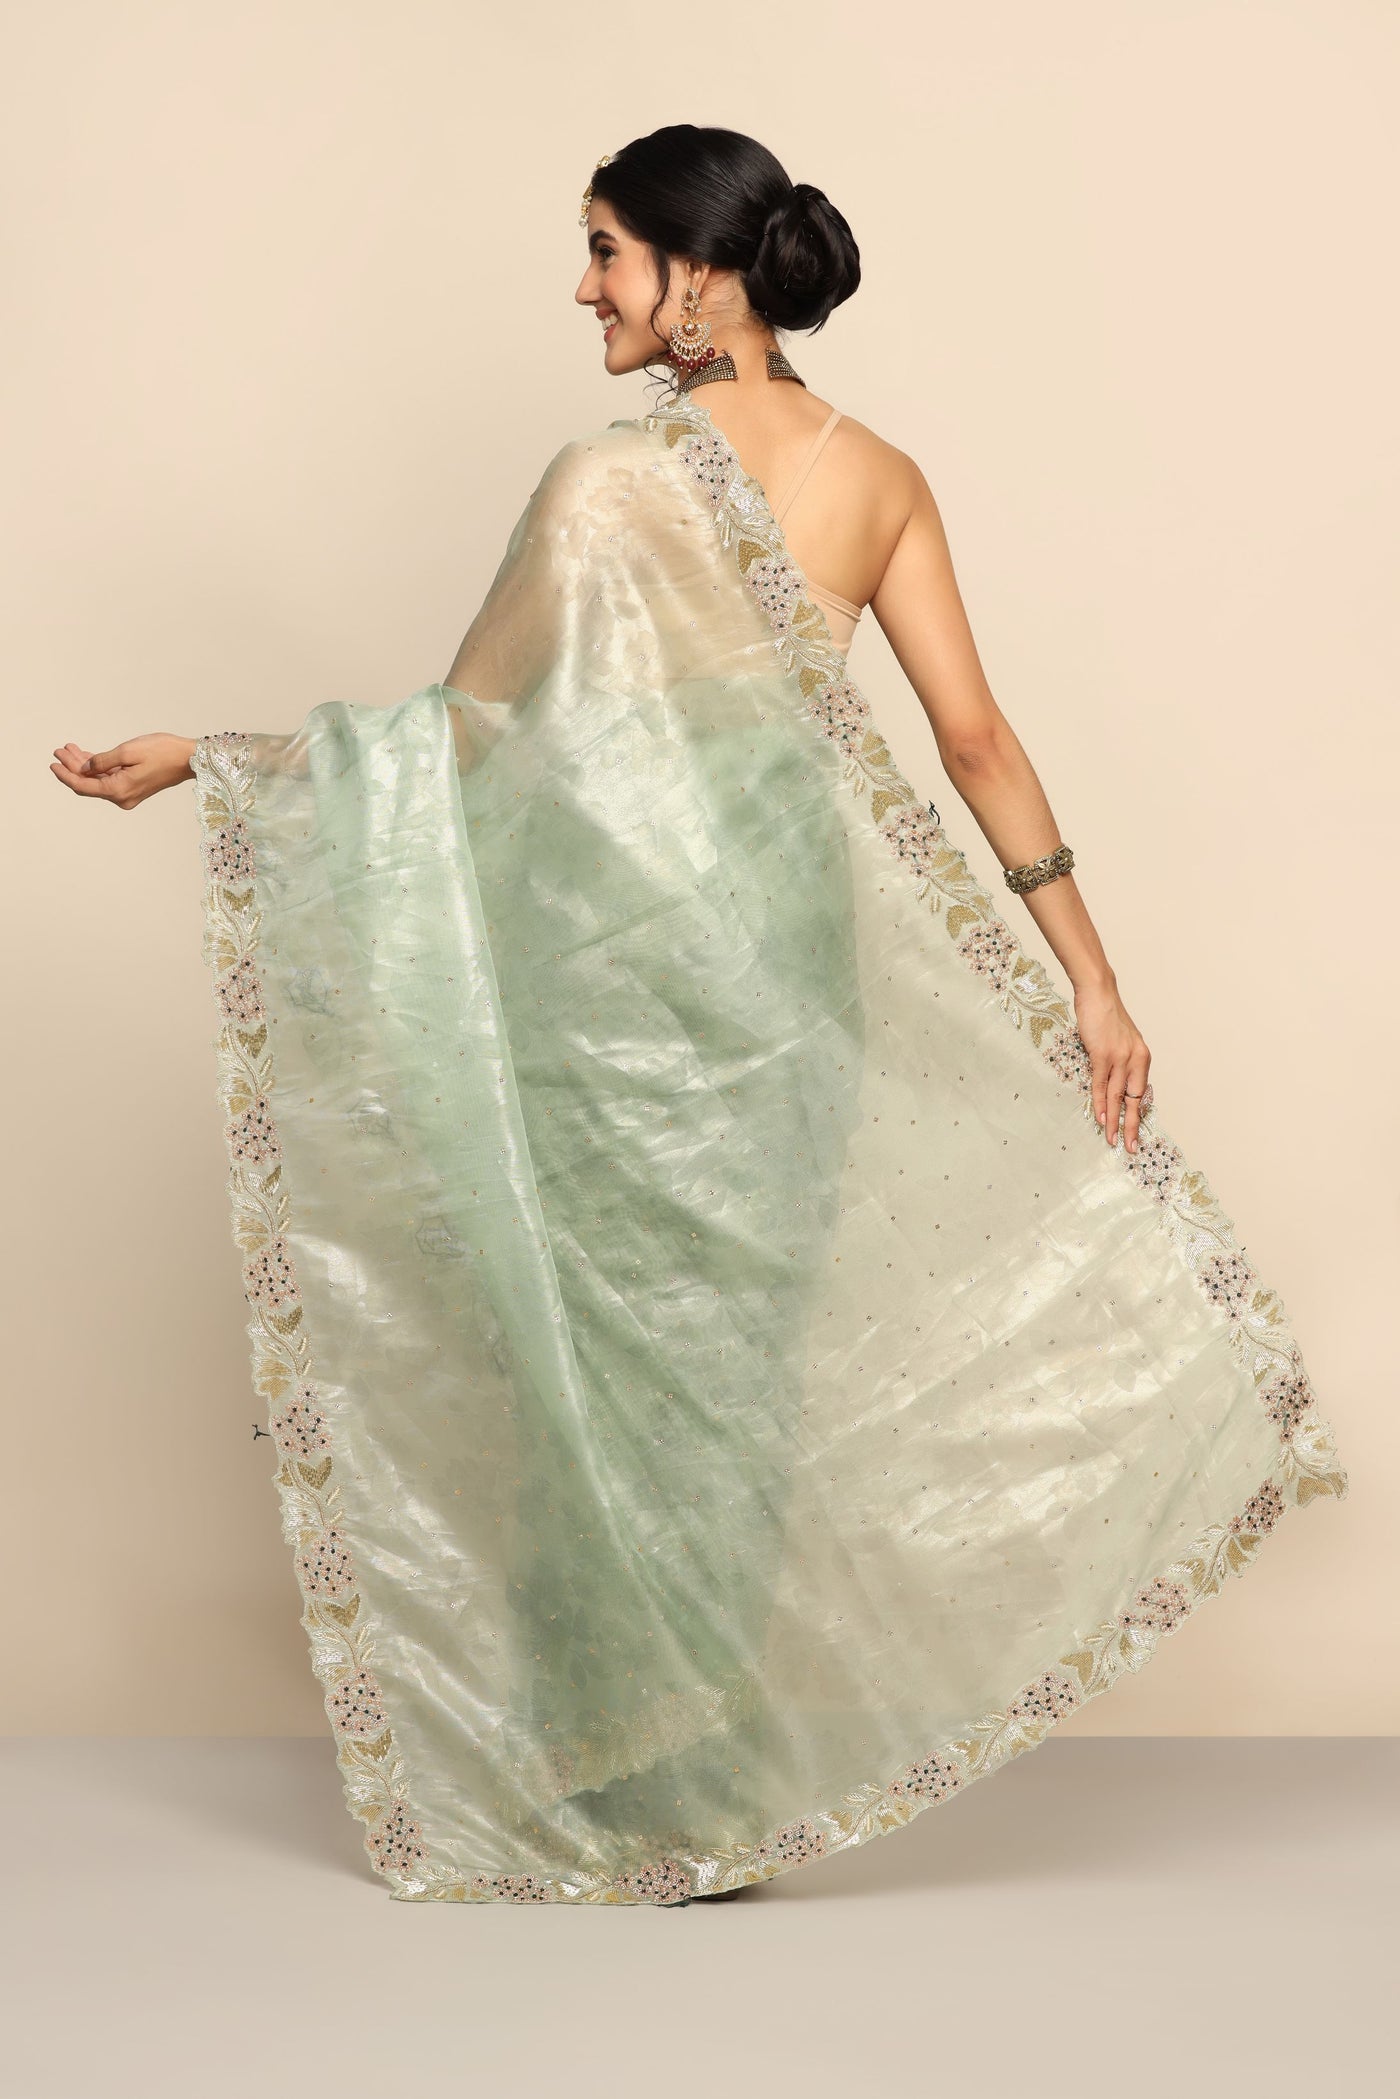 Stylish Pista Green Organza Saree with Beads and Thread Work | Unleash Your Charm